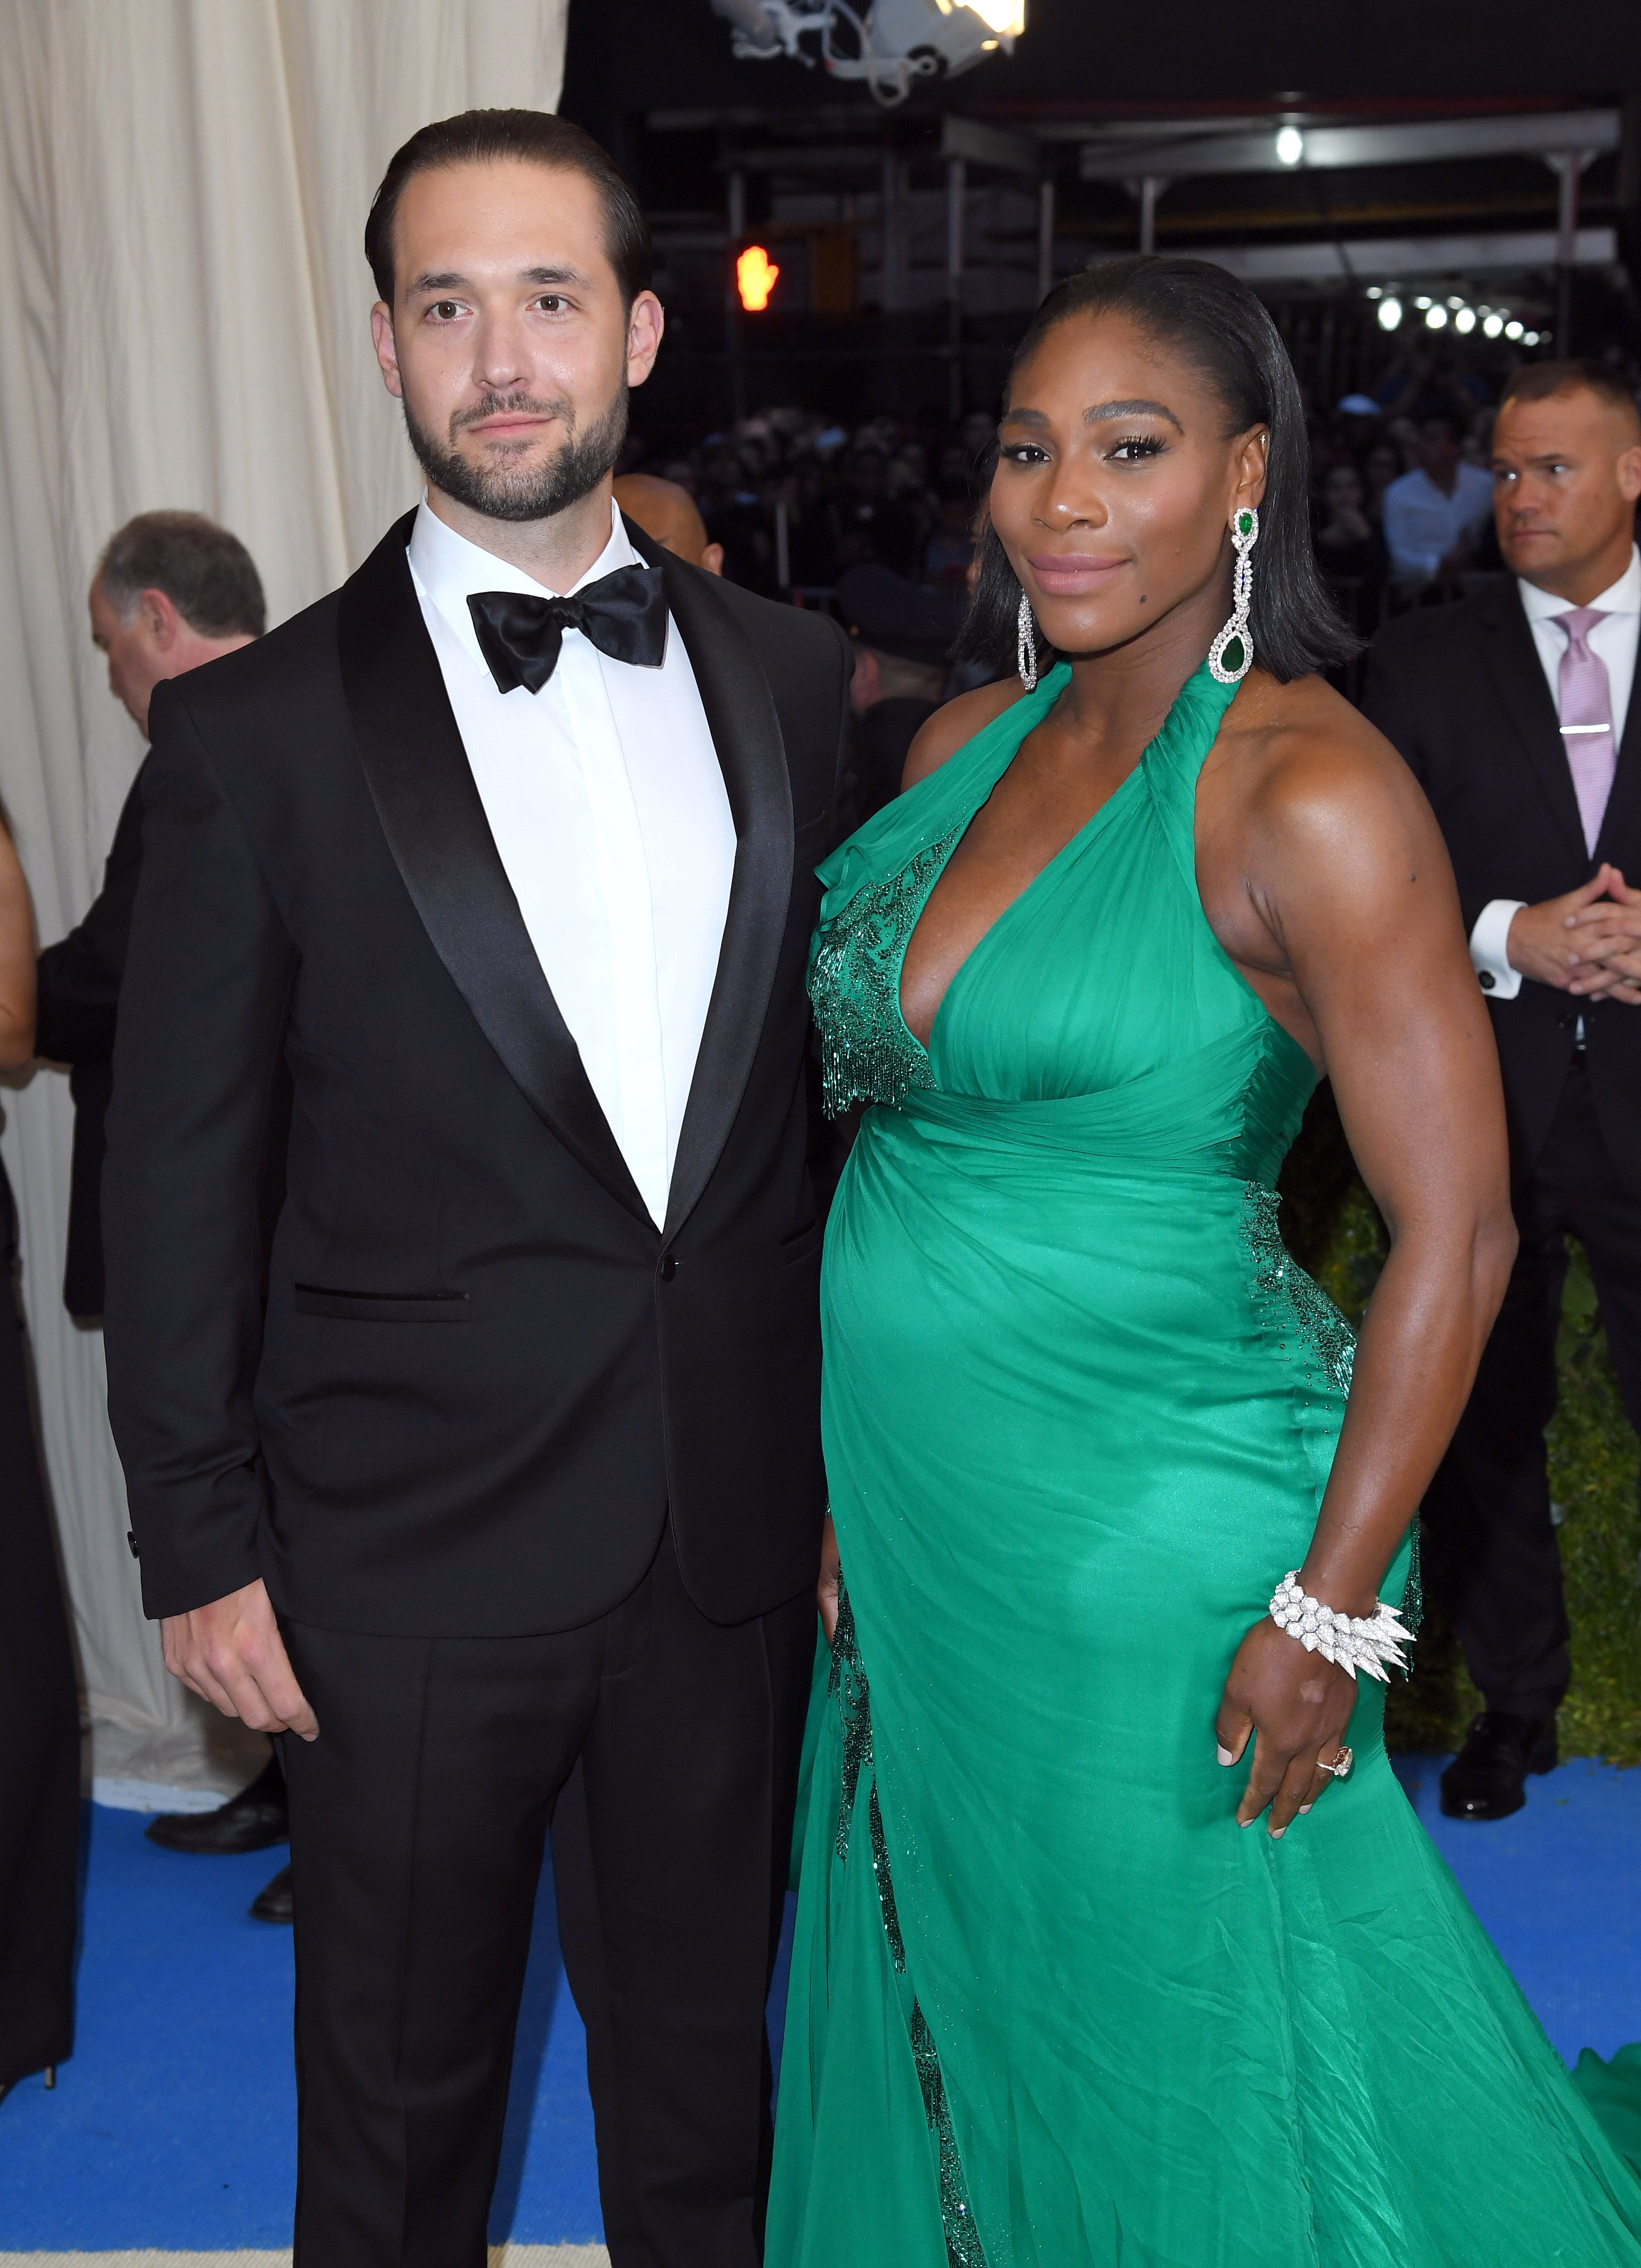 Serena Williams' Fiancé Reveals That She Has the Healthiest Pregnancy Cravings Ever
